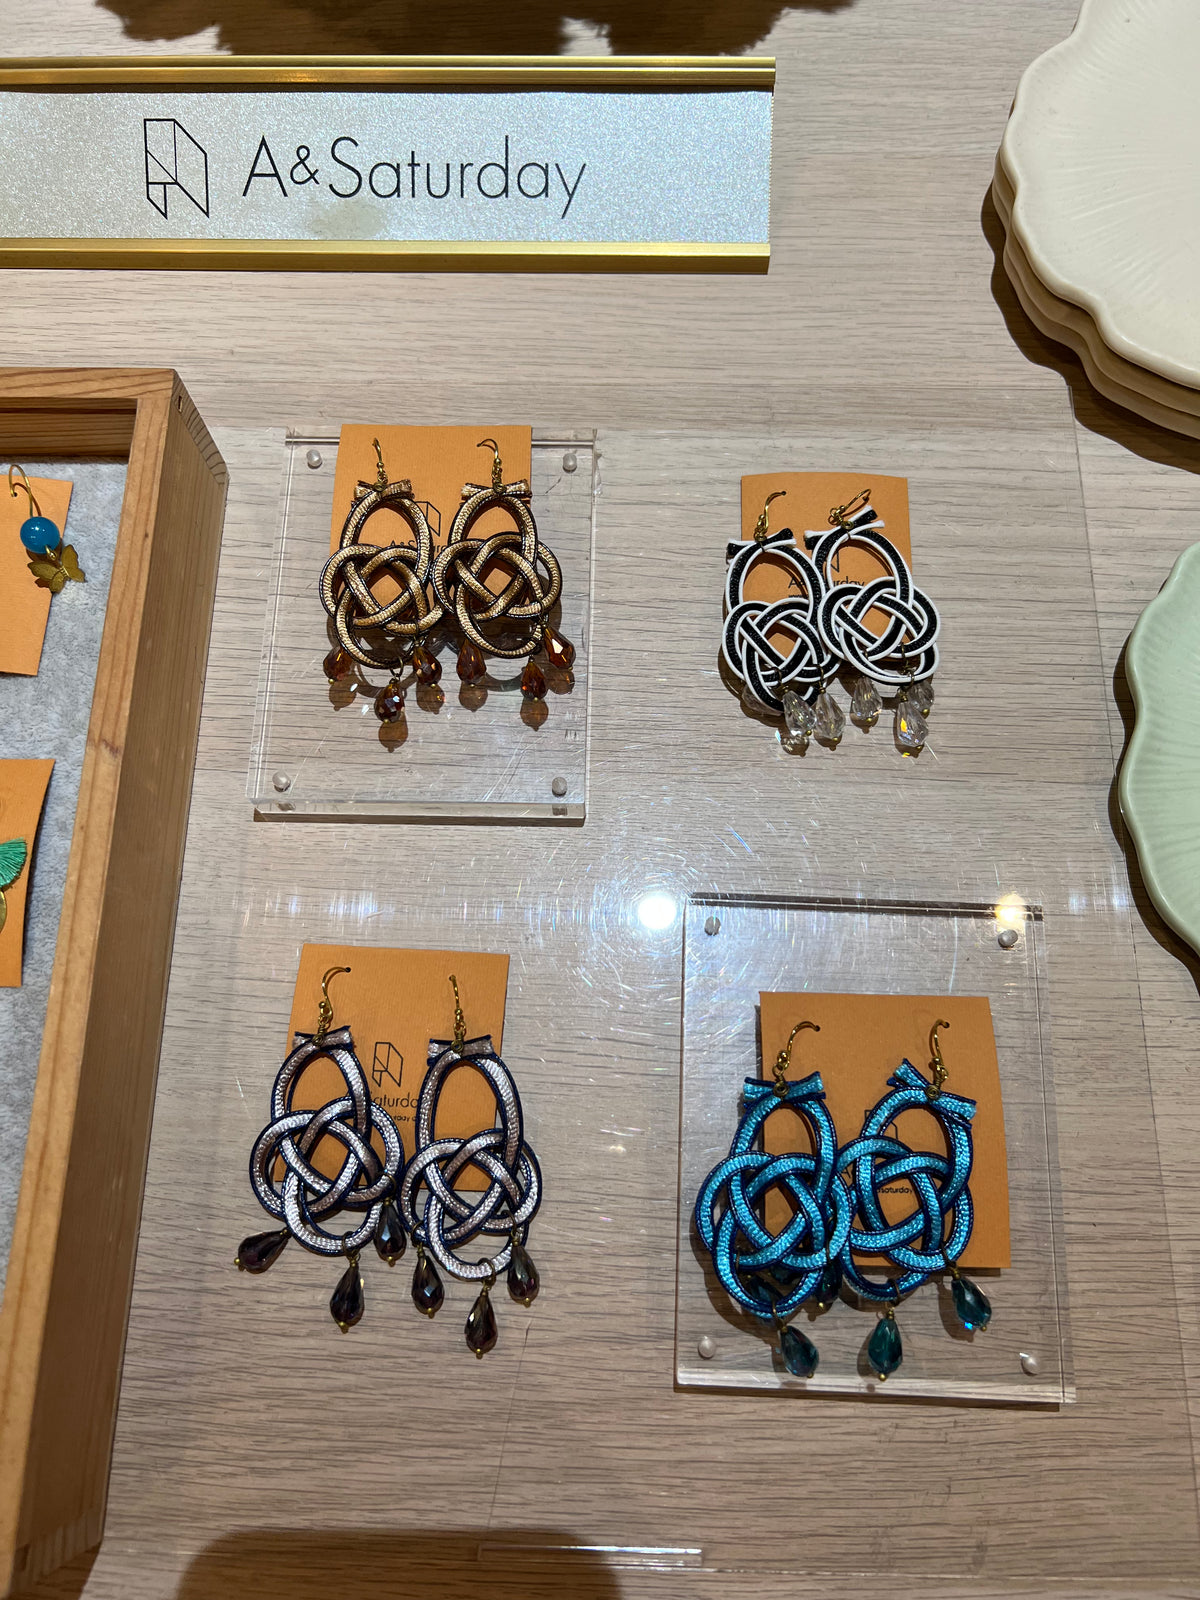 Maarni Japanese Cord Earrings (Blue and Brown With Black Crystal)